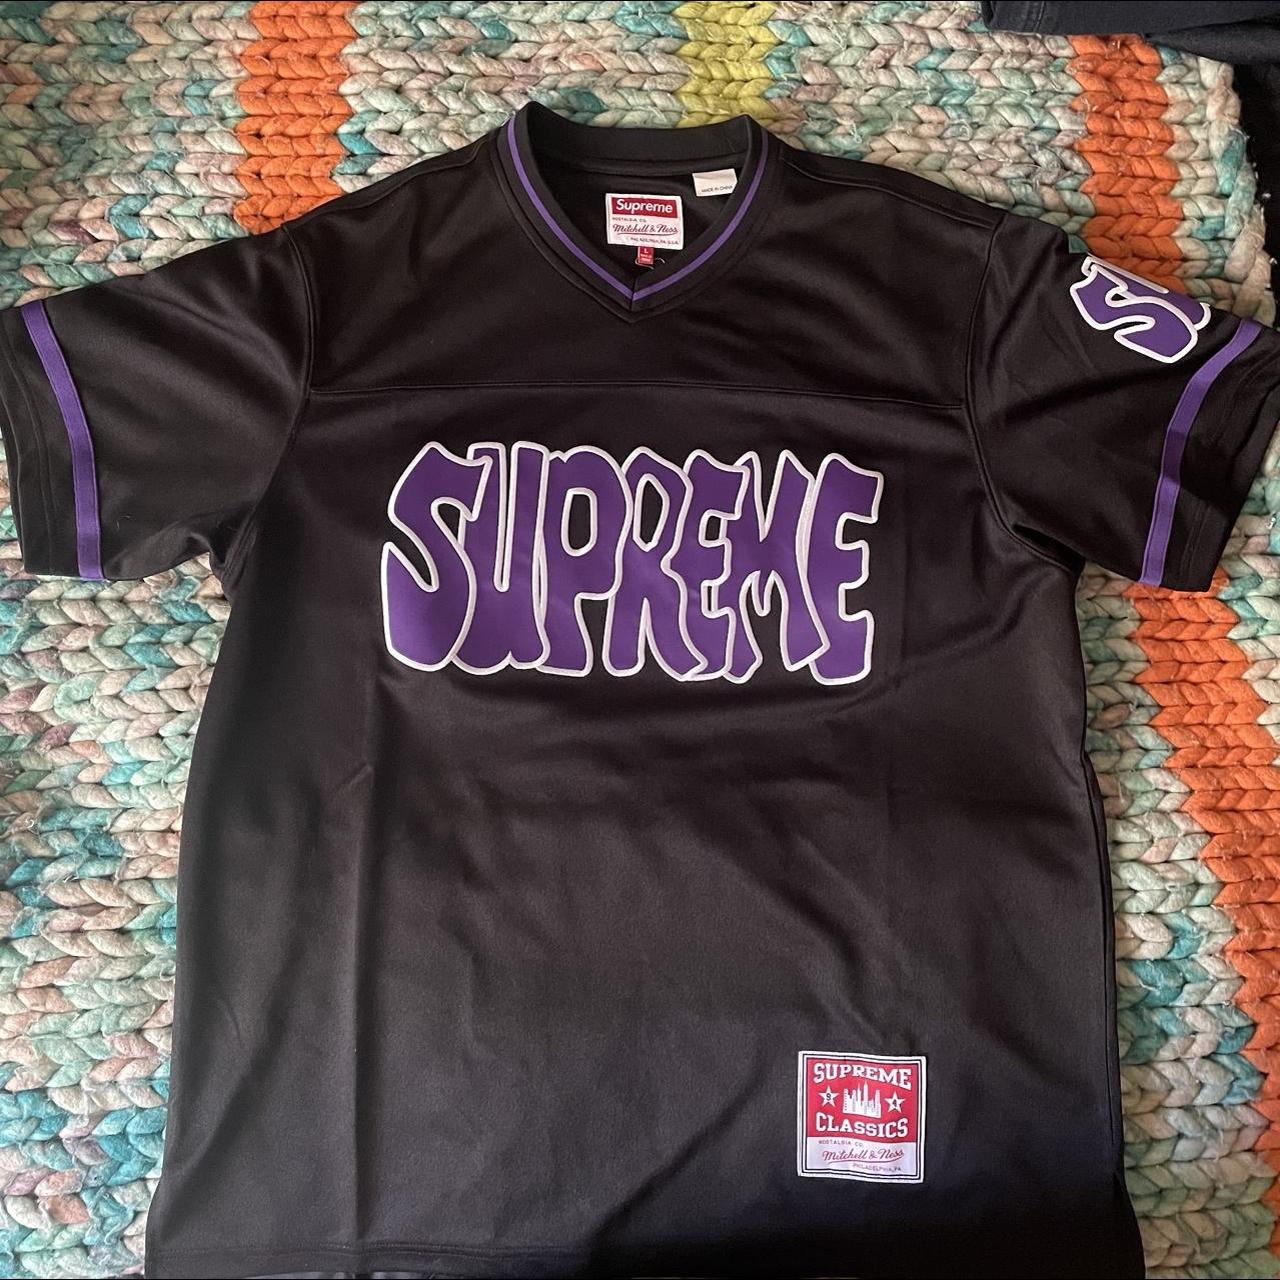 supreme mitchel and ness jersey worn once no flaws - Depop